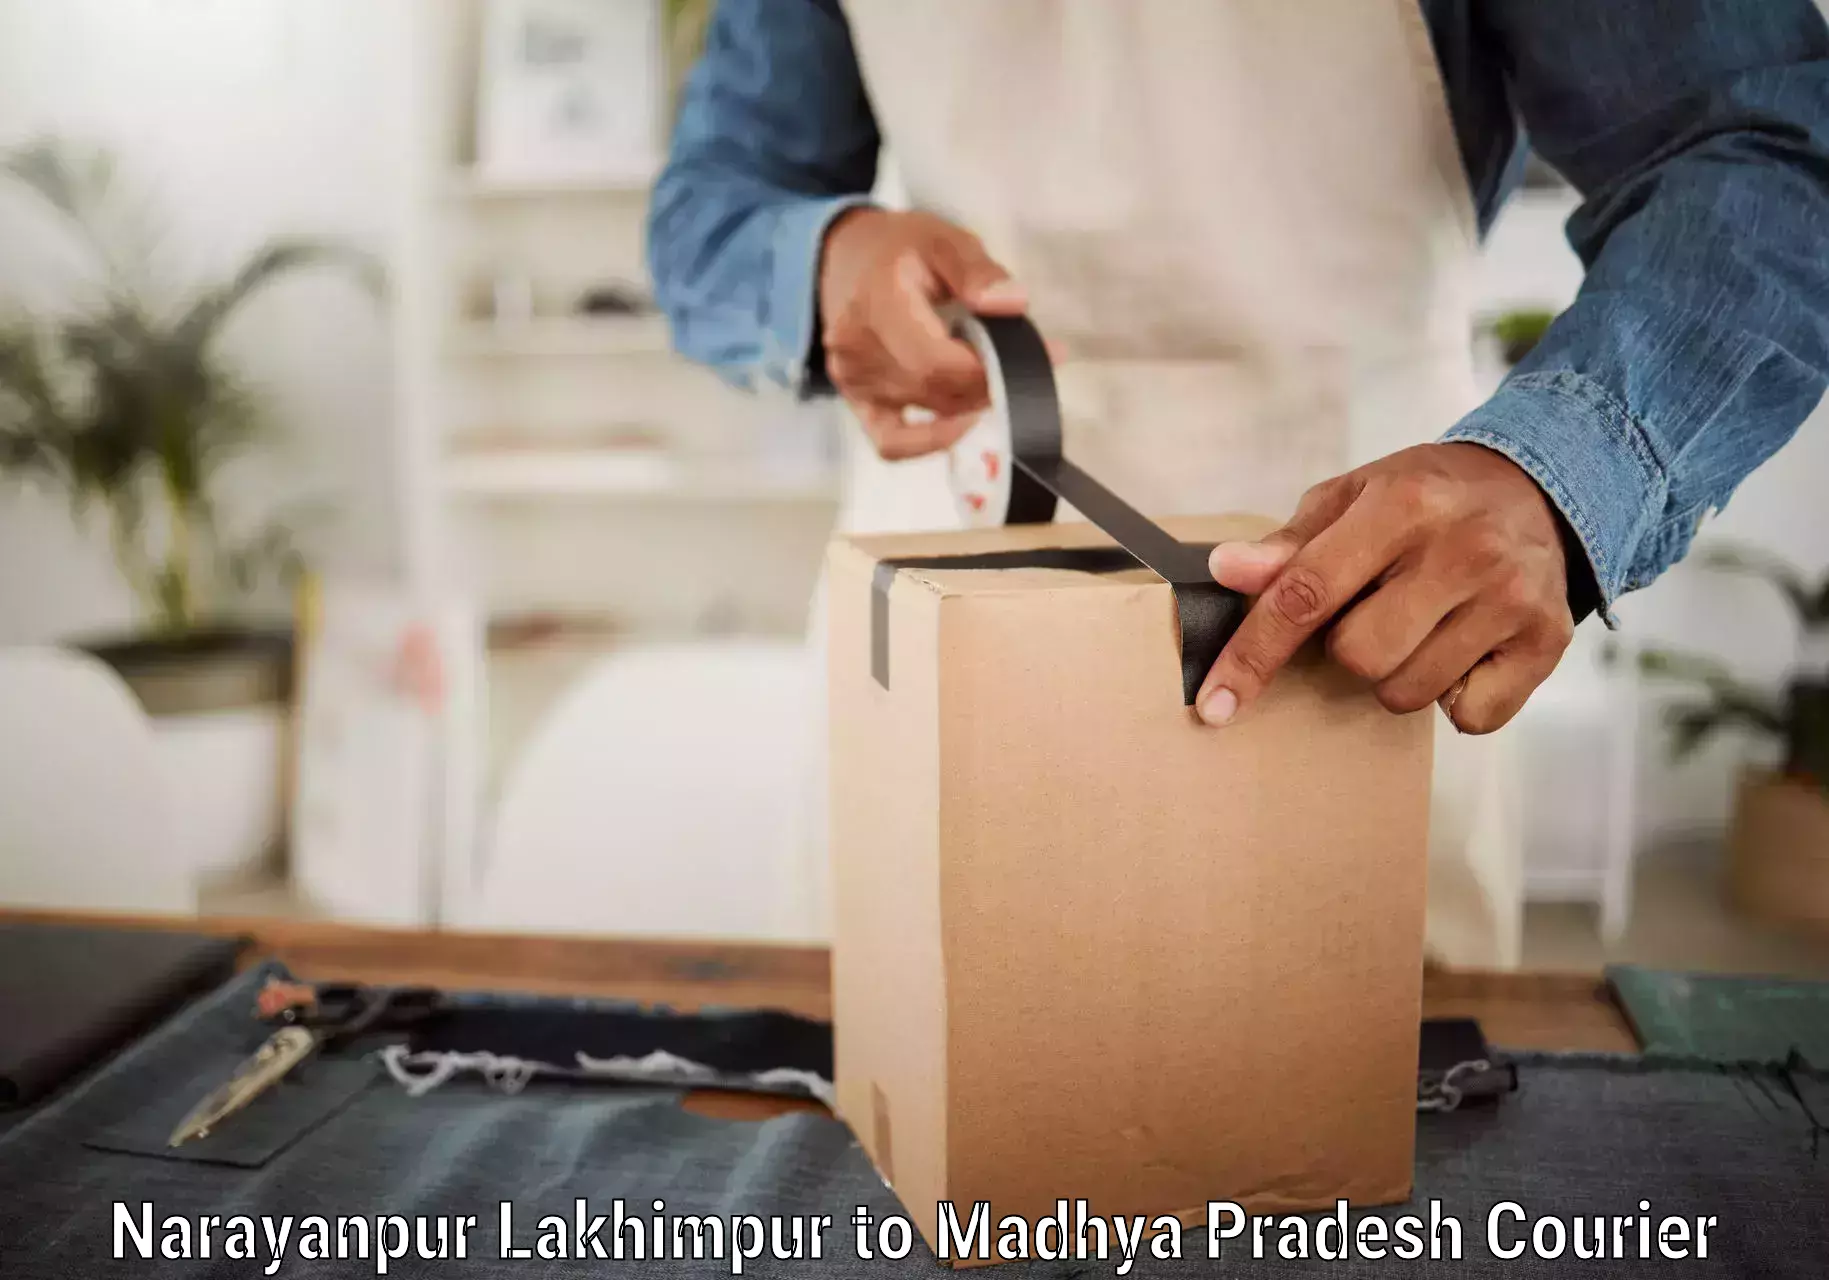 State-of-the-art courier technology Narayanpur Lakhimpur to Gwalior